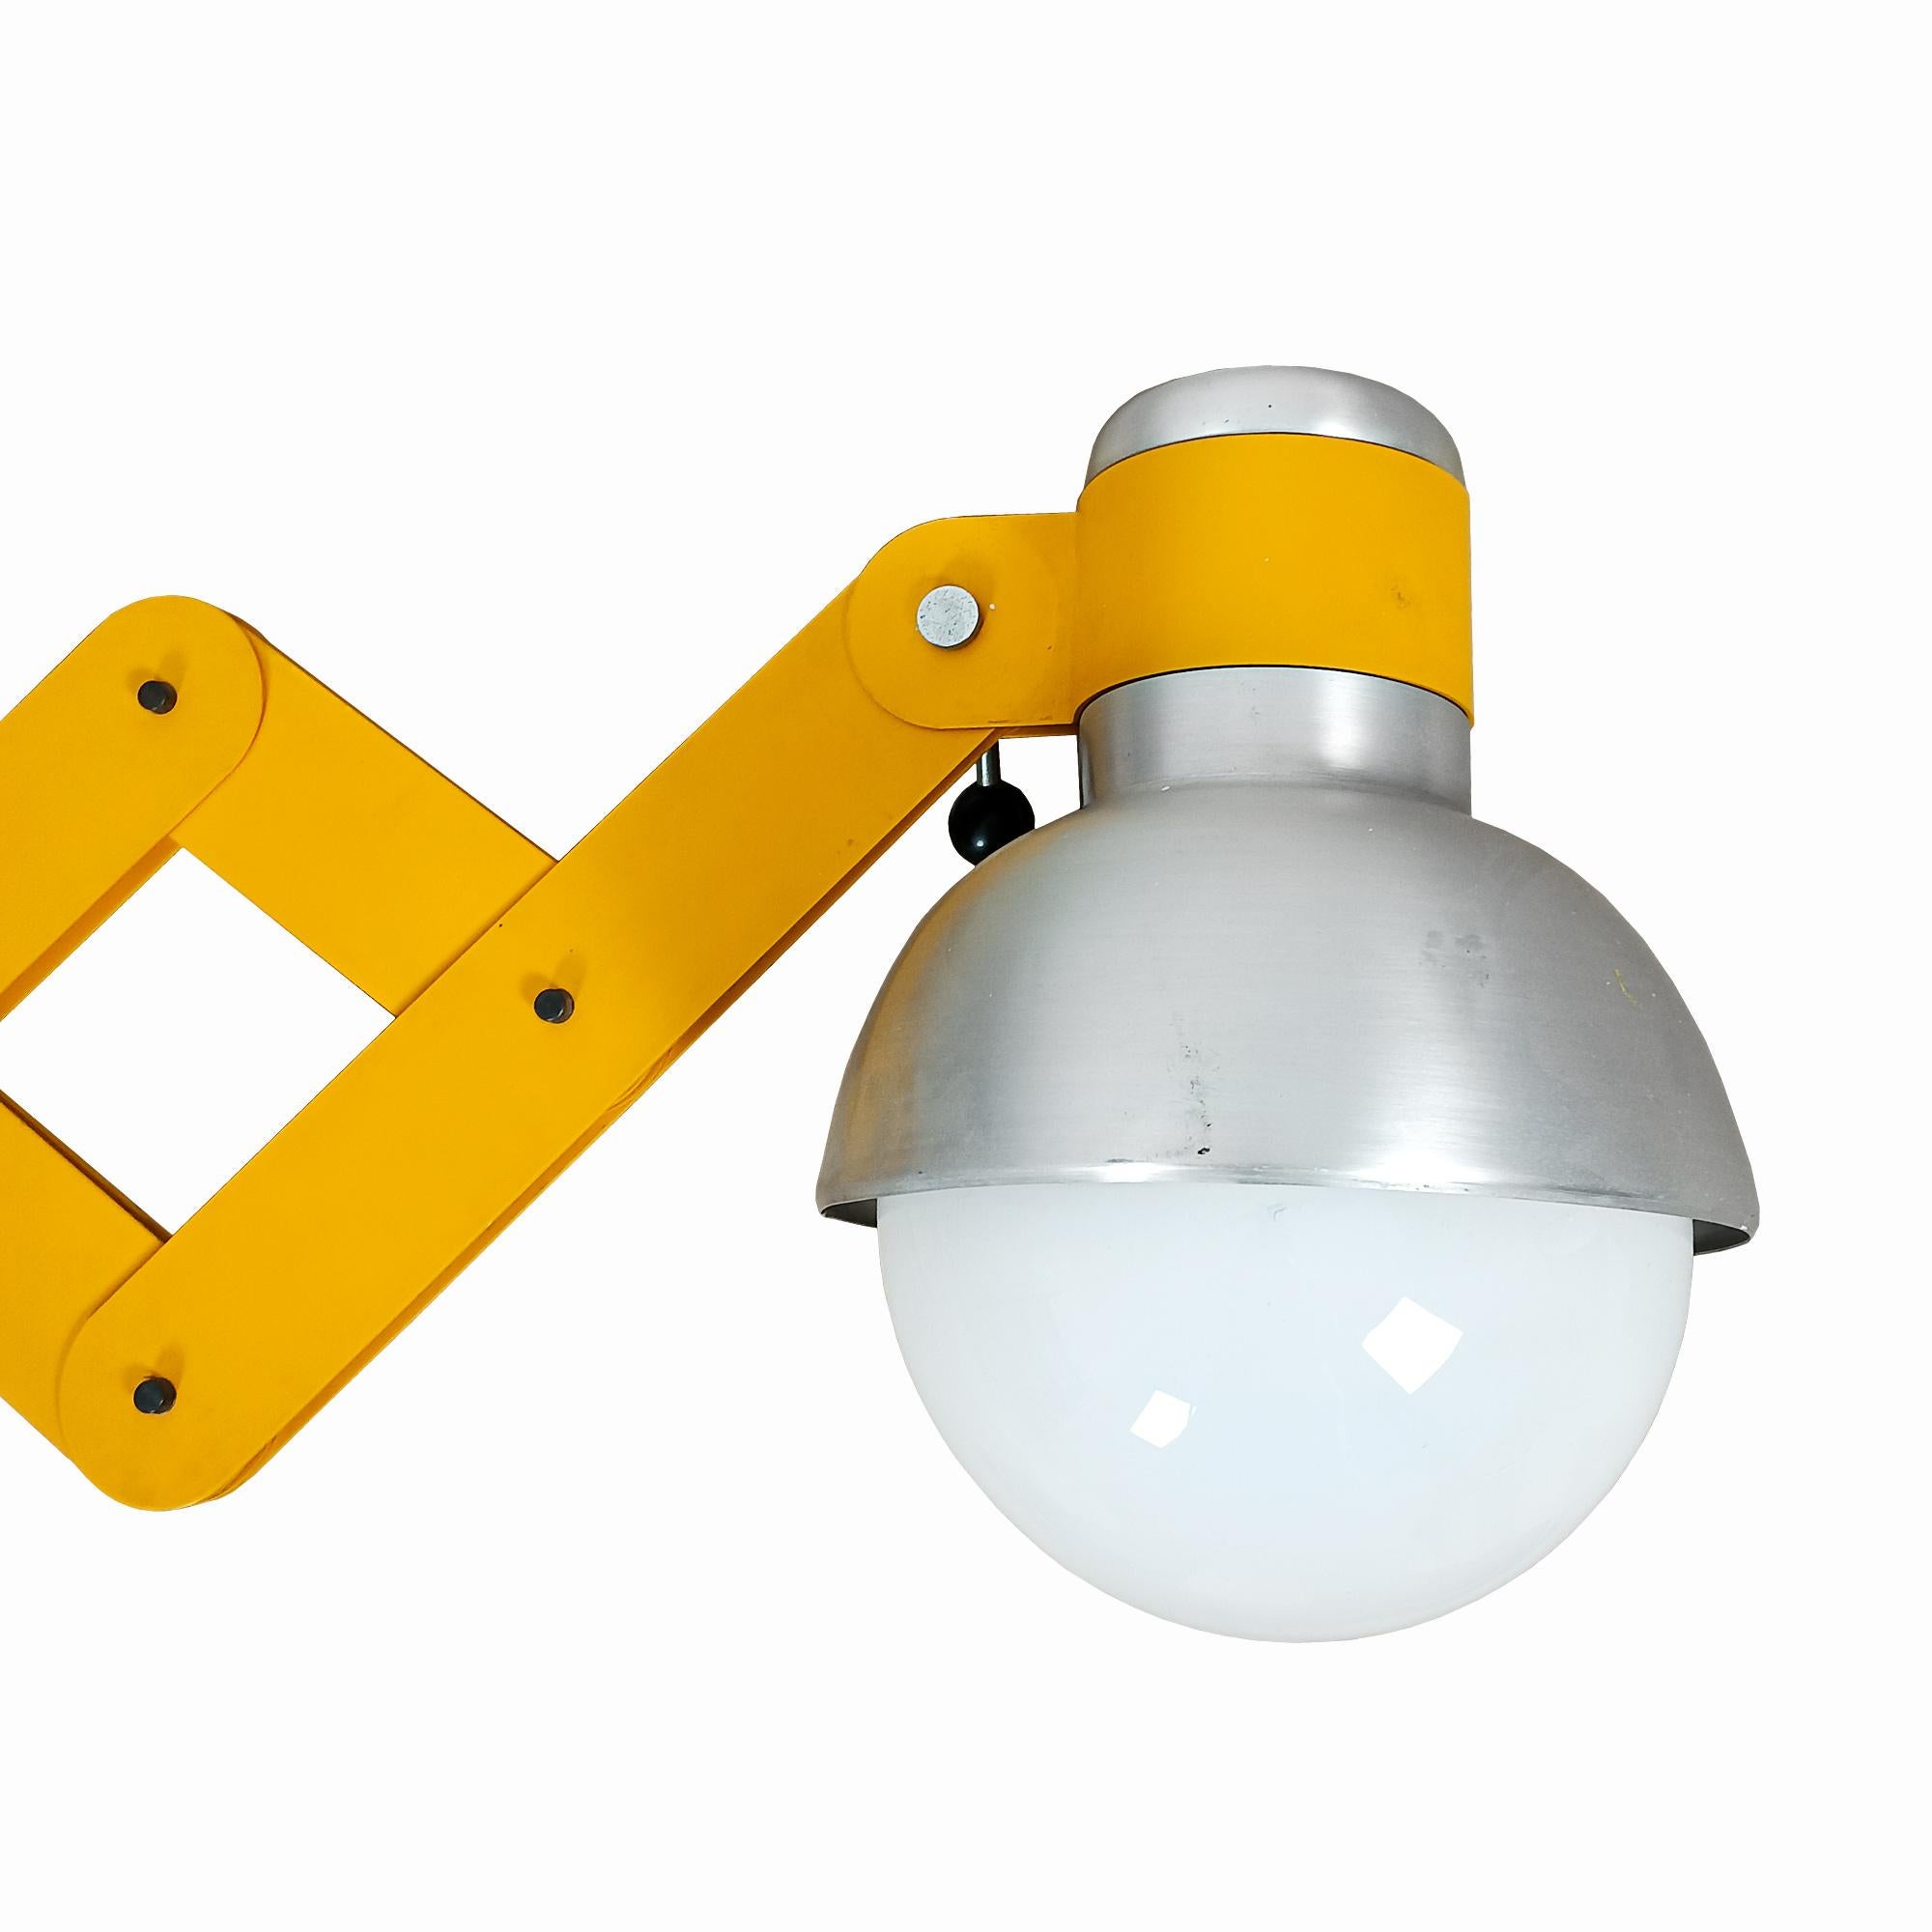 Large fully adjustable accordion wall lamp in yellow lacquered steel. Parts in chromed metal and adjustment handles in black plastic. Large white opaline ball and brushed aluminium lampshade.

Design: Ramon Bigas Balcells.

Spain, Barcelona c. 1970.